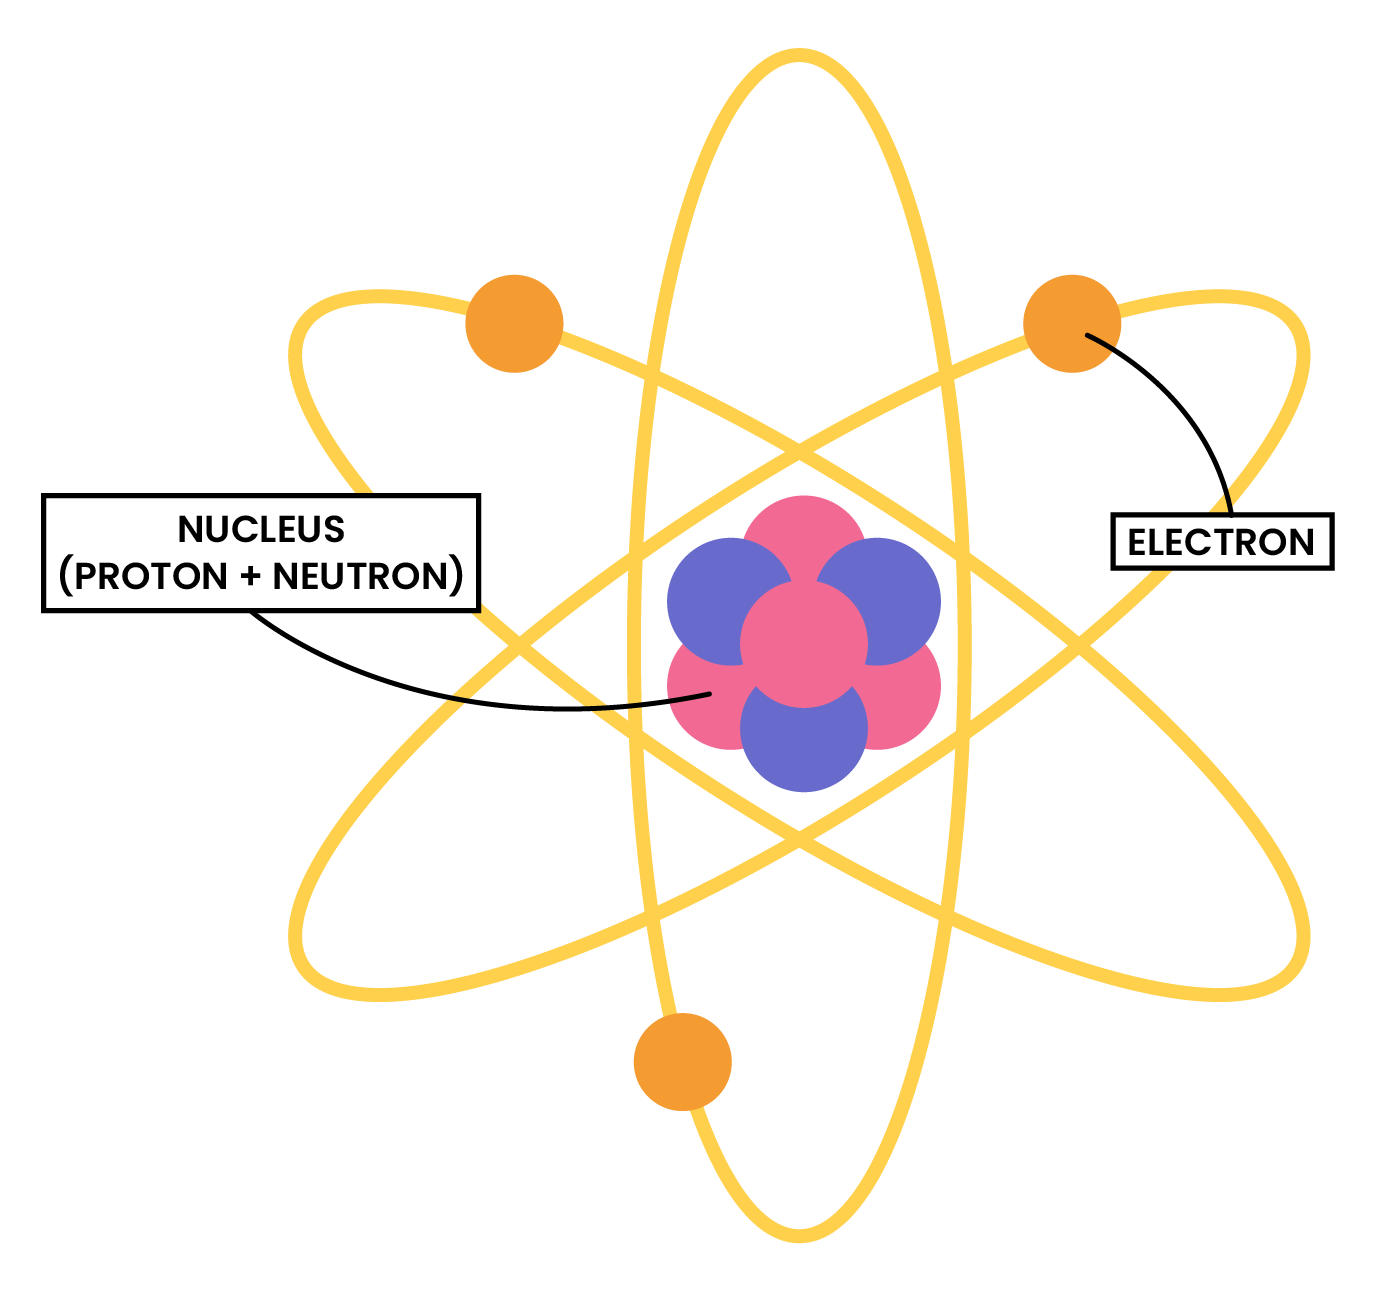 edexcel_igcse_chemistry_topic 03_atomic structure_002_atomic structure rutherford labelled diagram